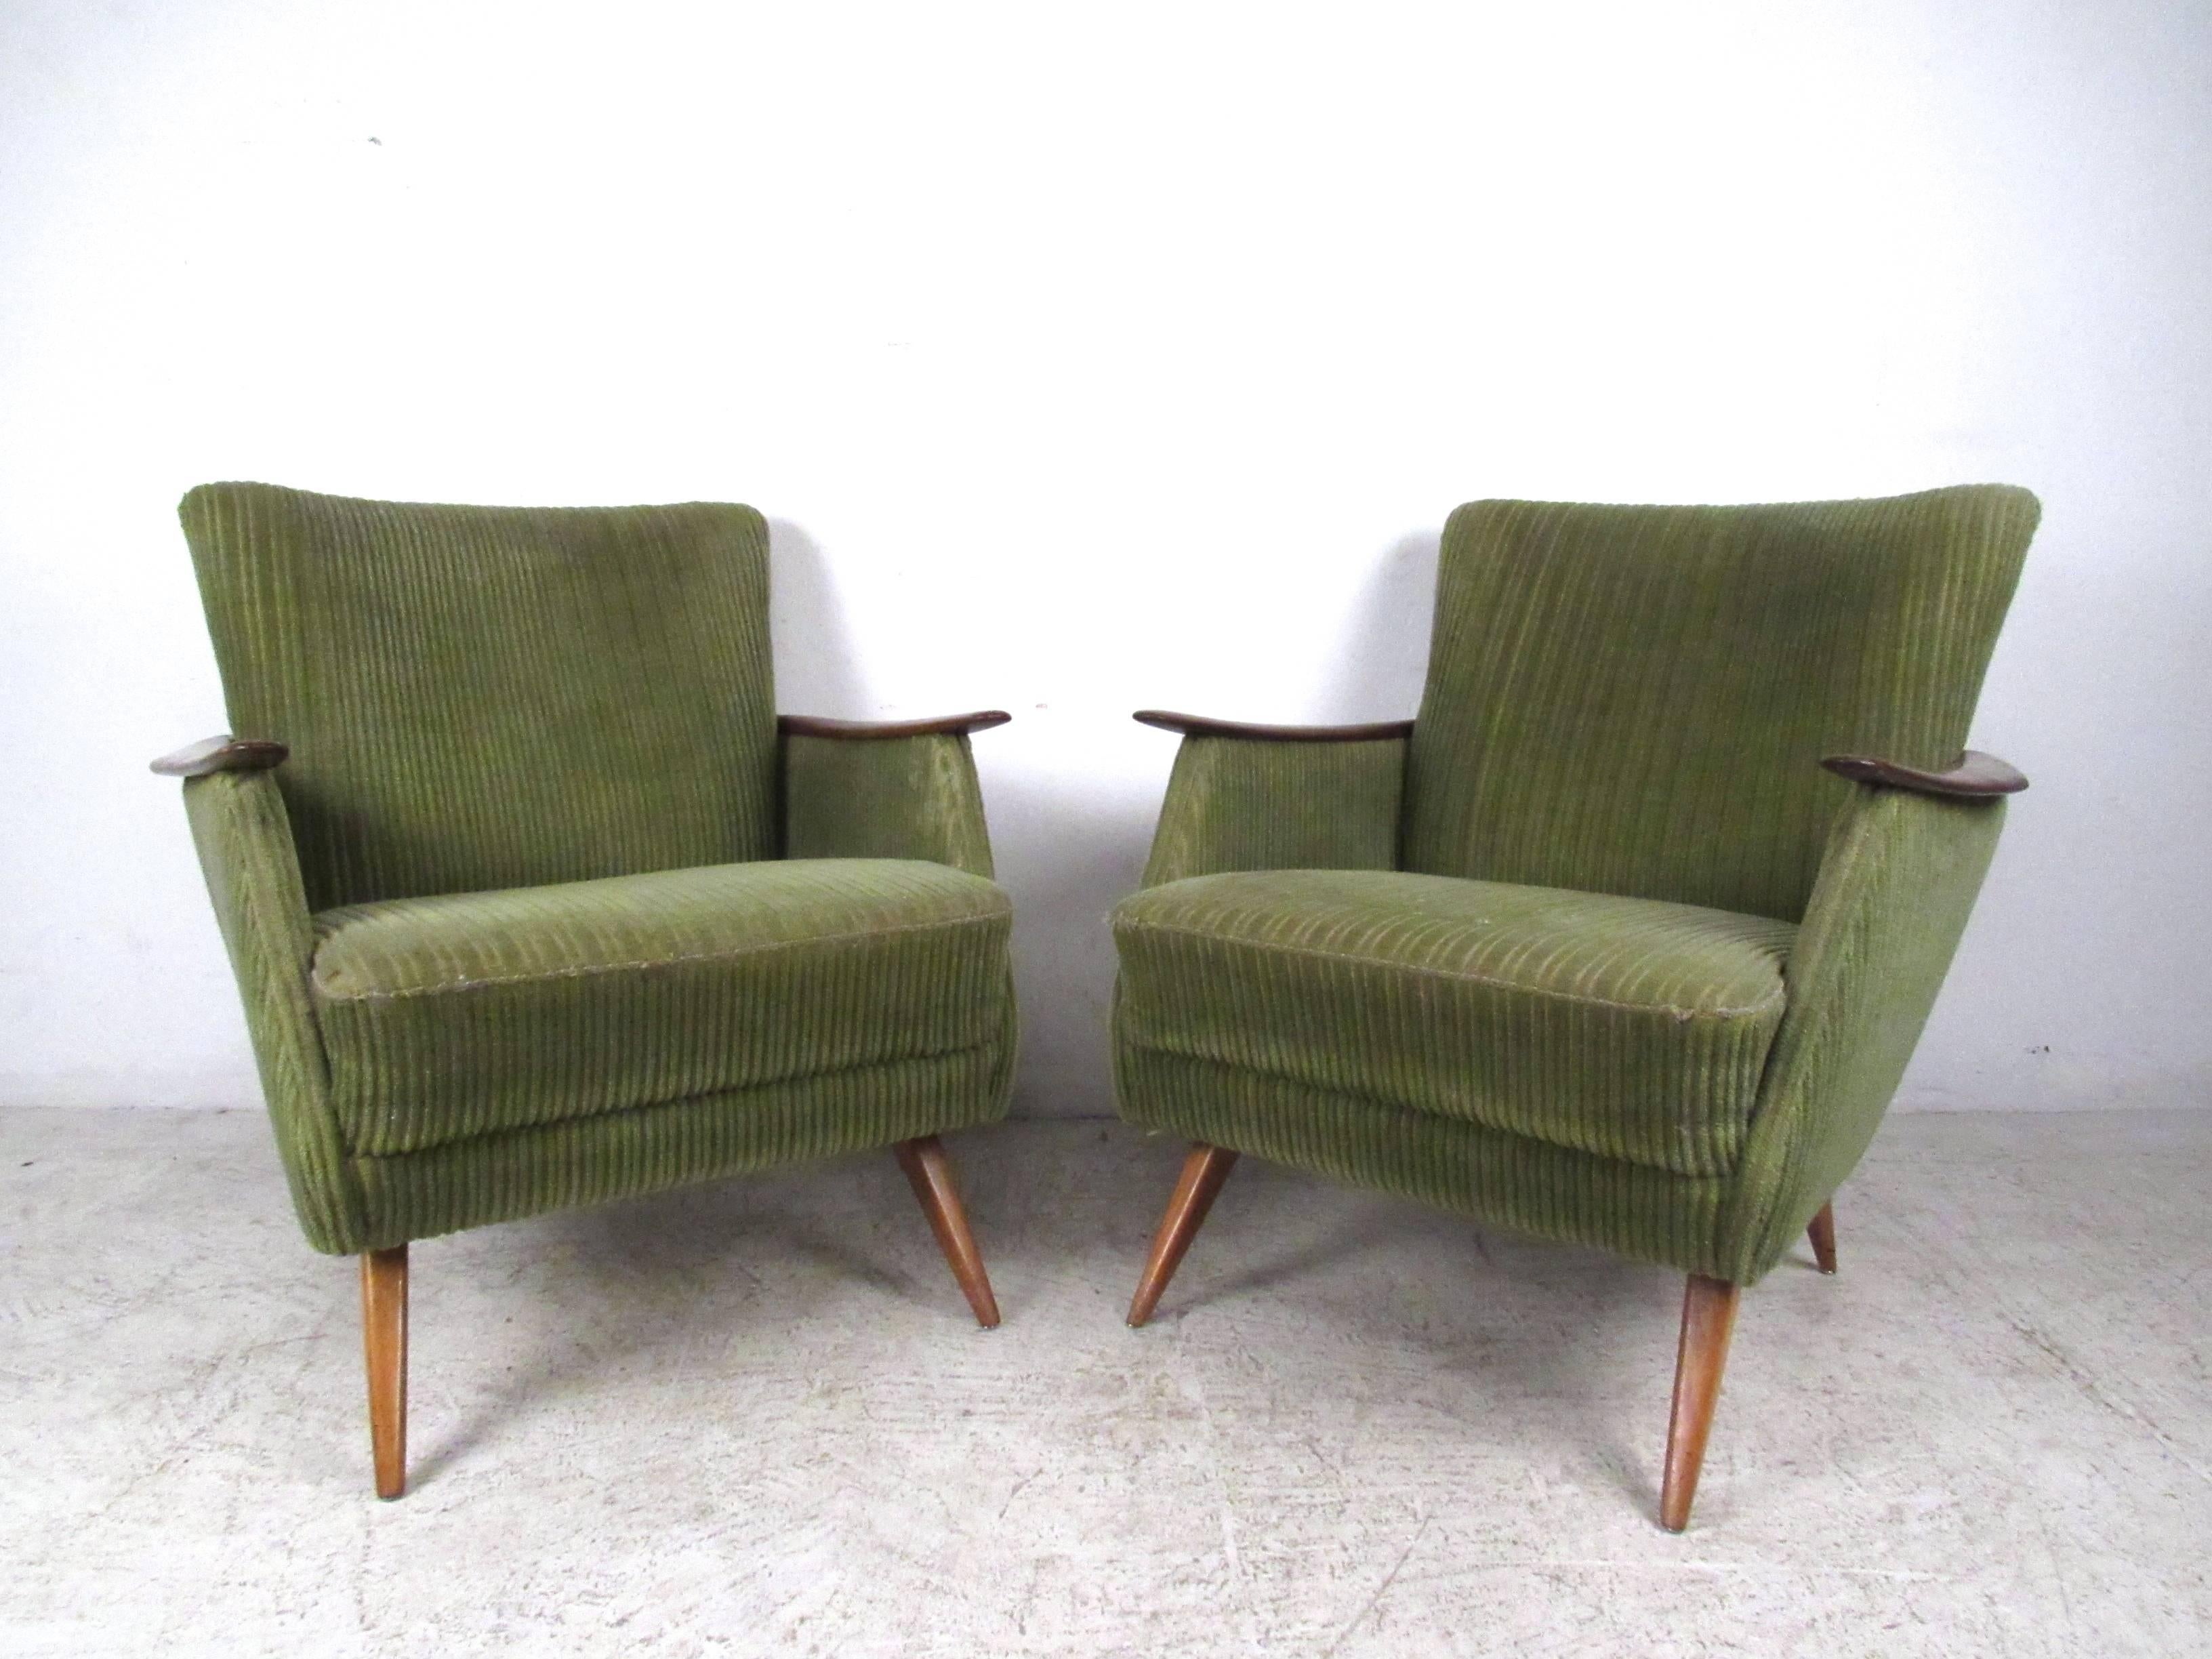 This stunning pair of vintage Danish armchairs features unique tapered legs, sculpted wooden arms, and wraparound wood trim. The vintage style and modern comfort of the pair make these a unique addition to any interior. Matching sofa available,